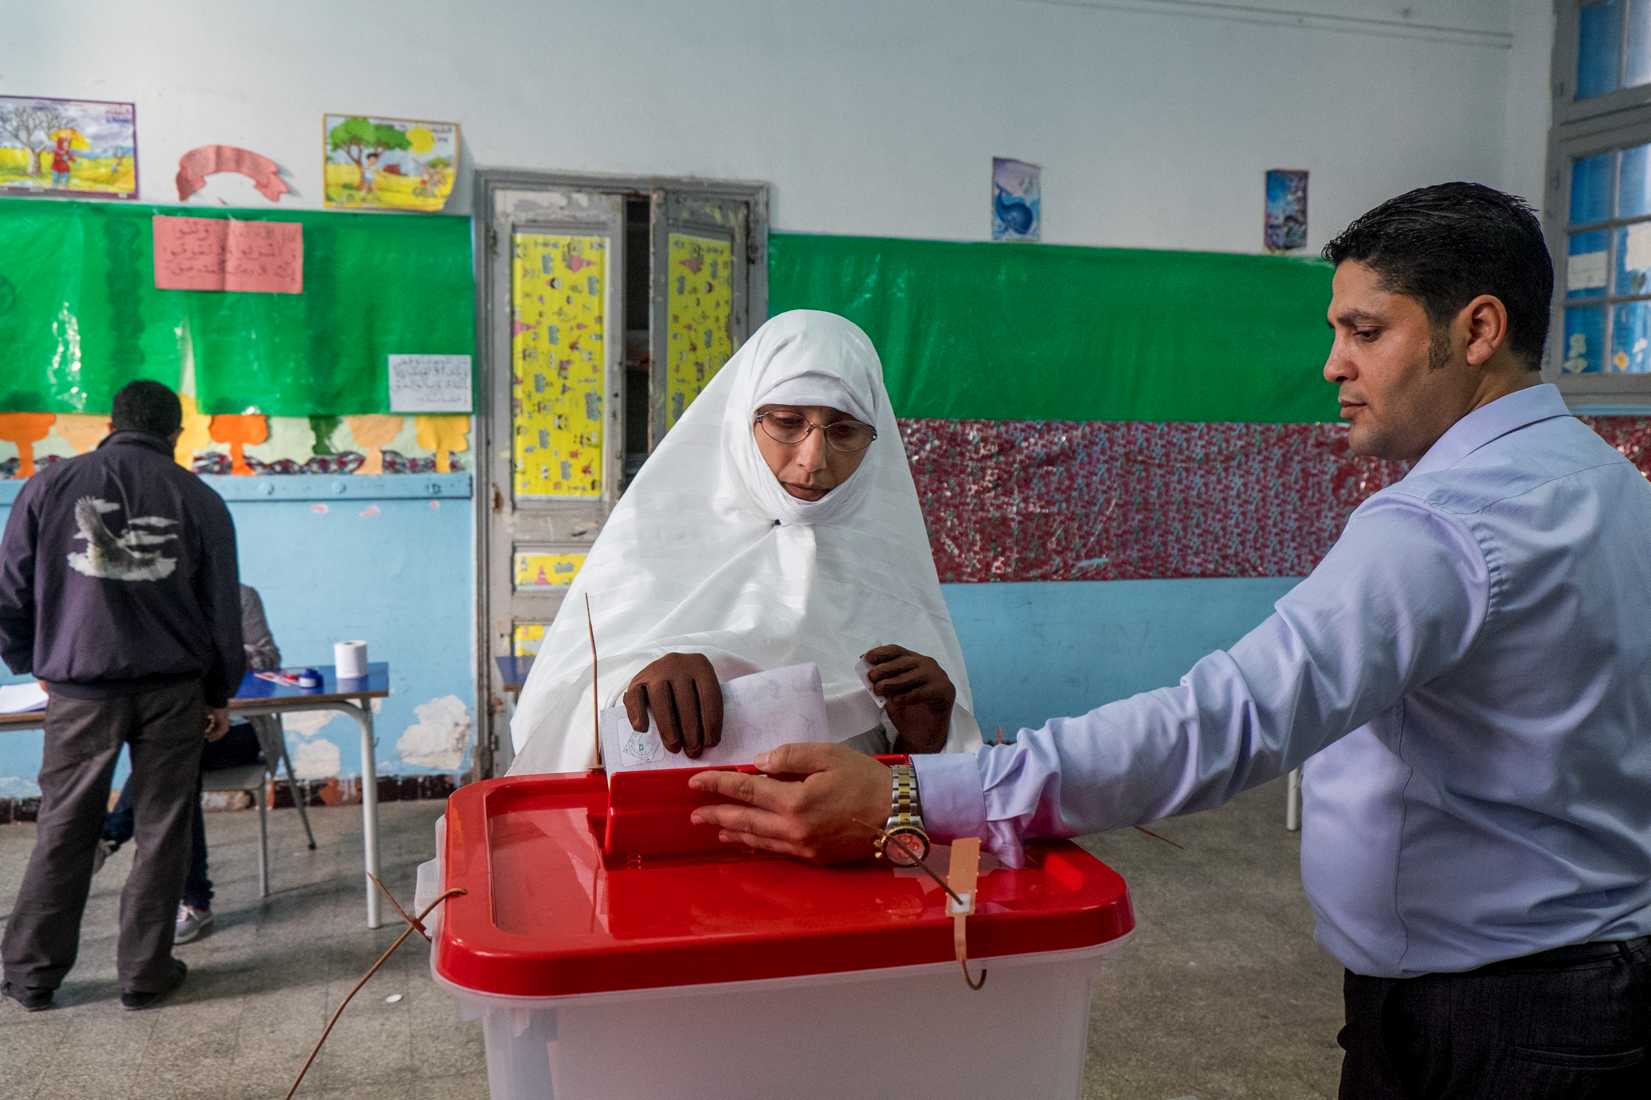 A Tunisian citizen casts her vote at a polling station during the Tunisian presidential election on Nov. 23, 2014, in Fouchana, suburb of Tunis (Nicolas Fauque—Images des Tunisie/Sipa USA/AP)